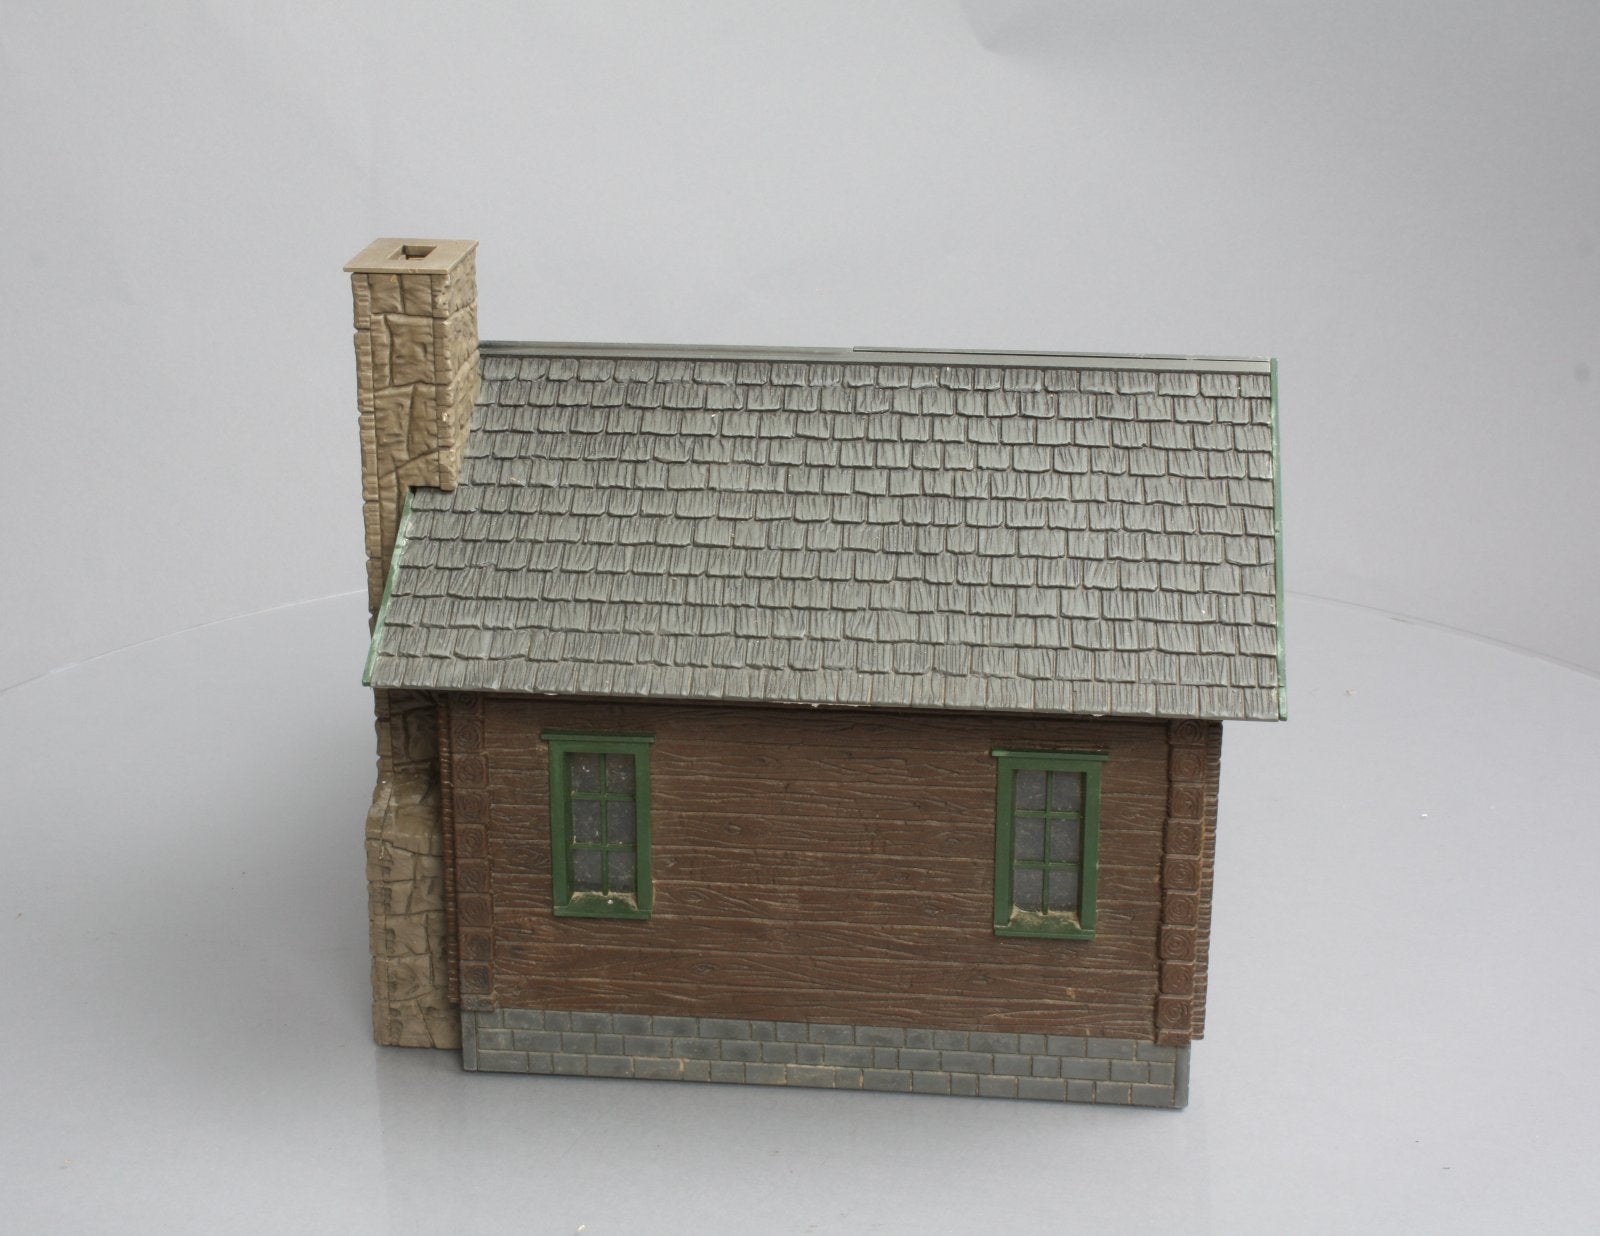 Piko 62104 G Scale Dr. Reynold's Country Home